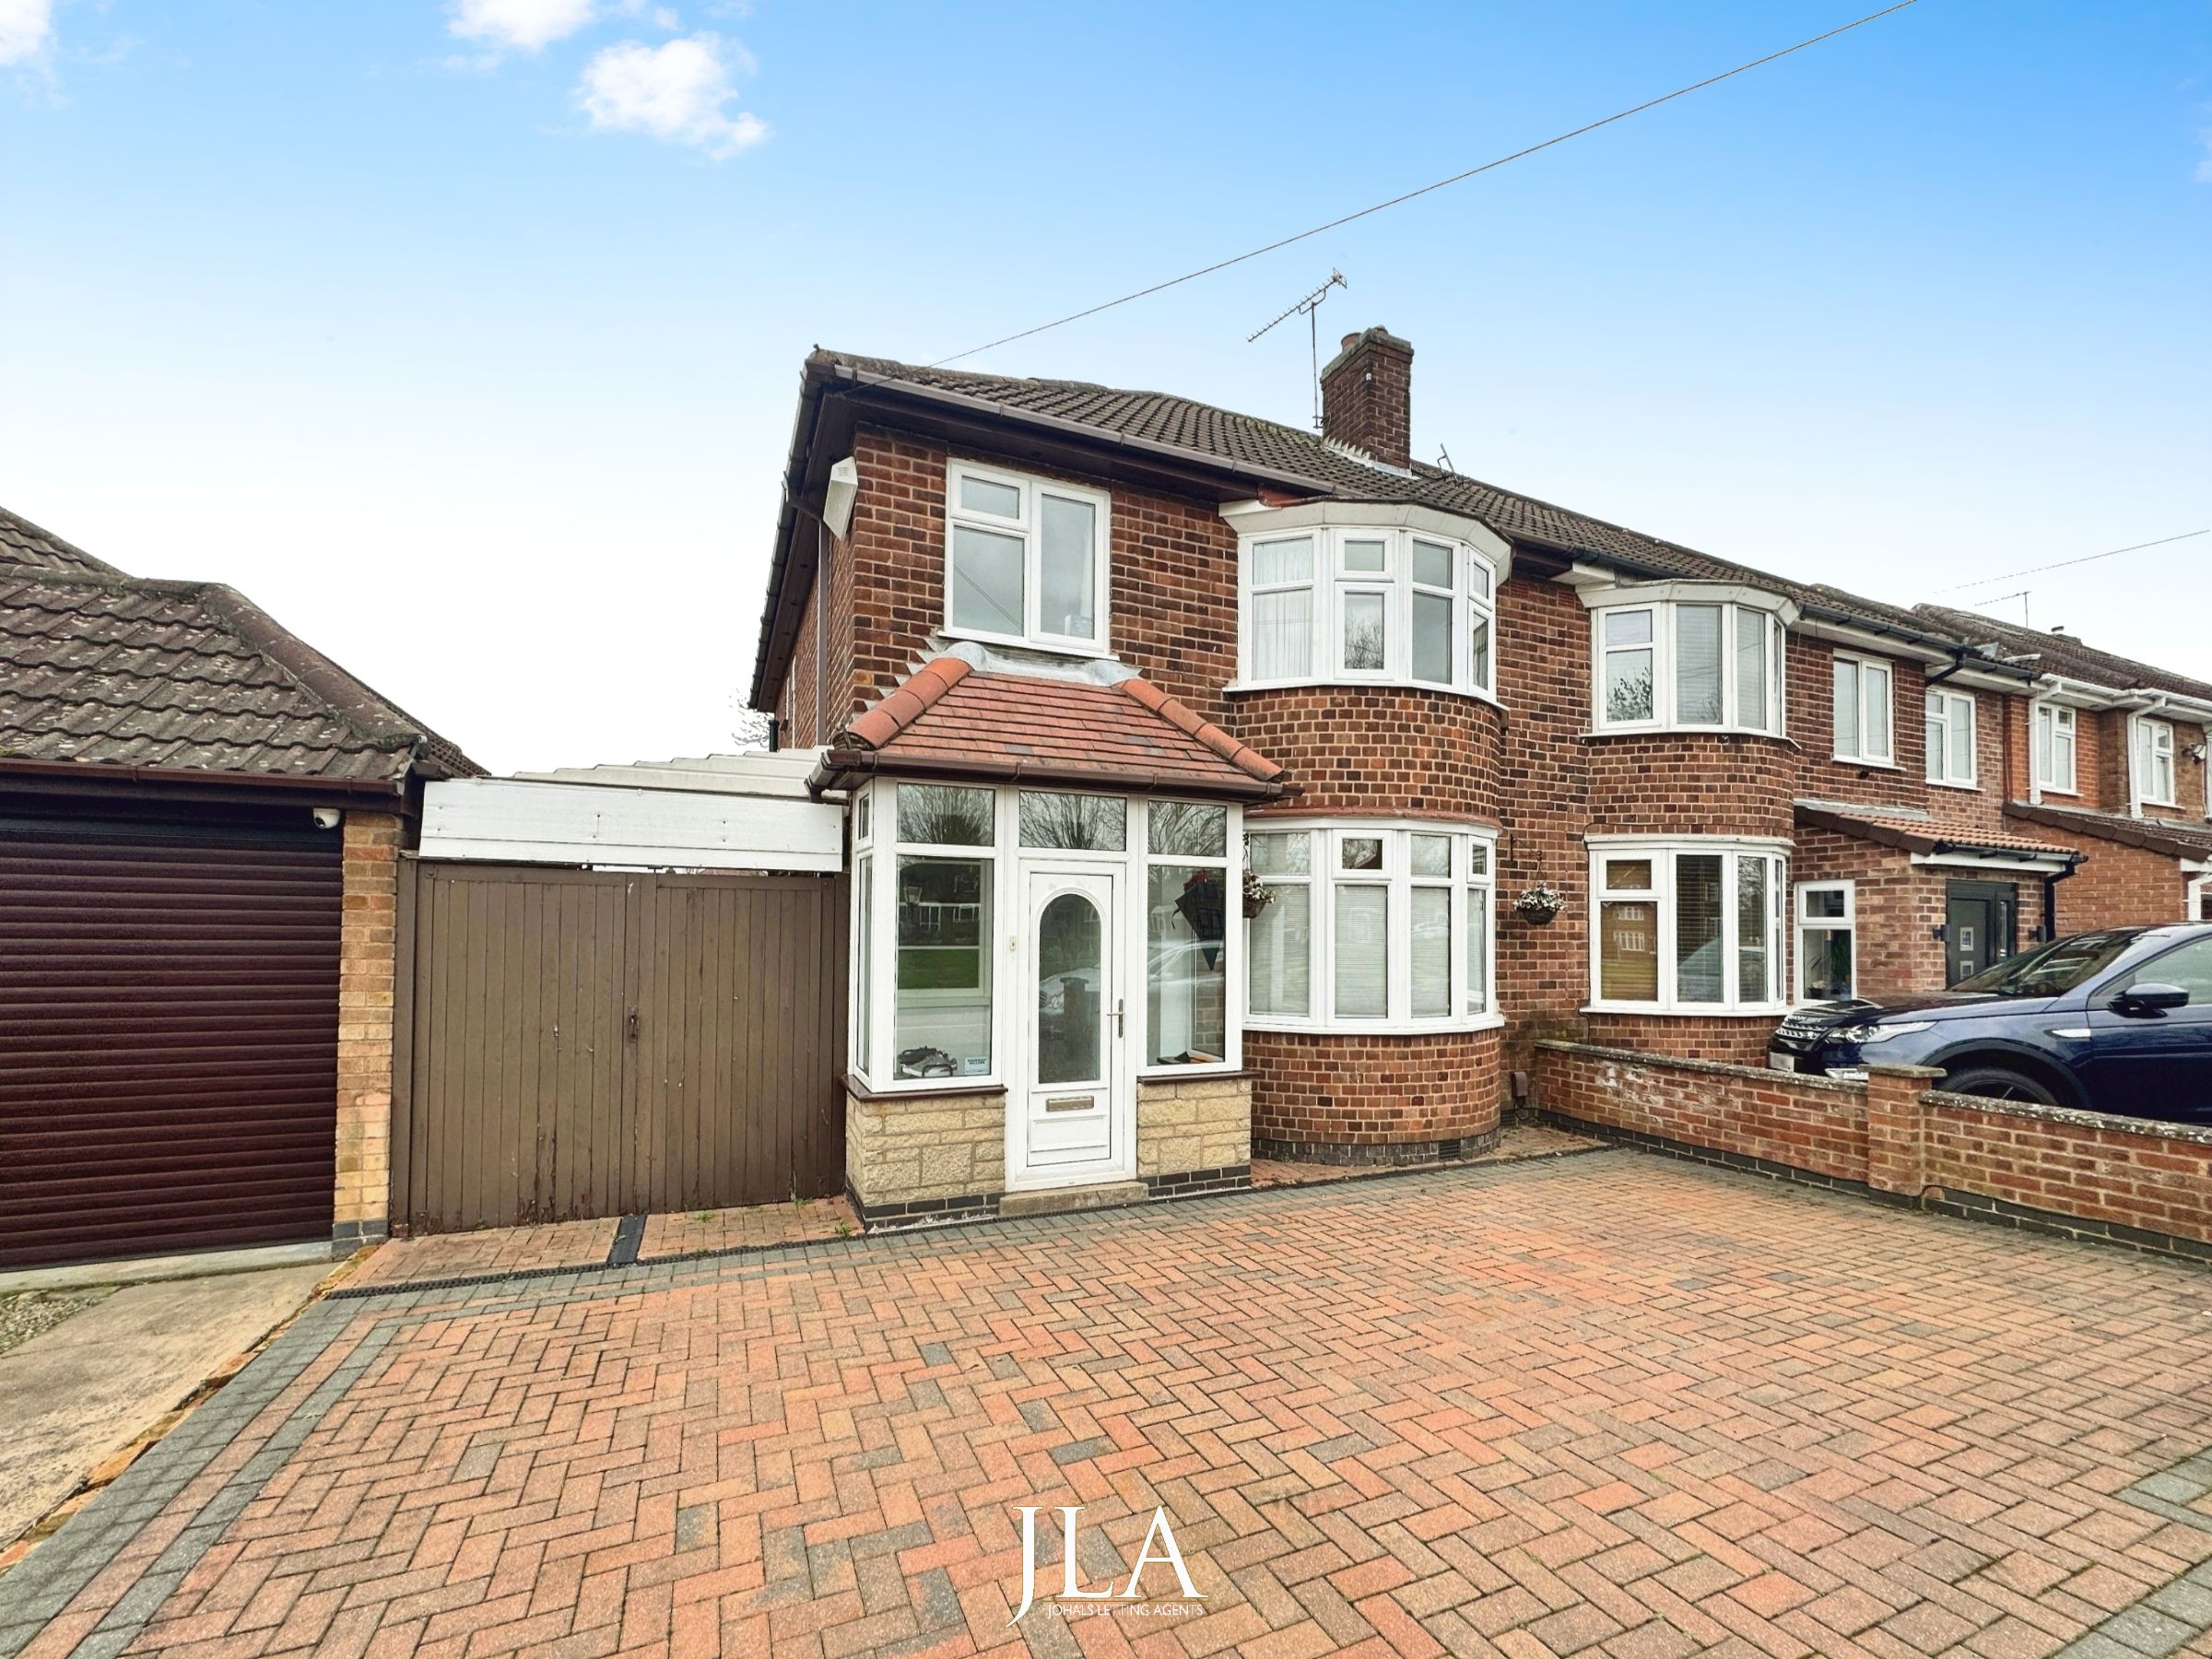 3 bed semi-detached house to rent in Kingsway, Leicester - Property Image 1